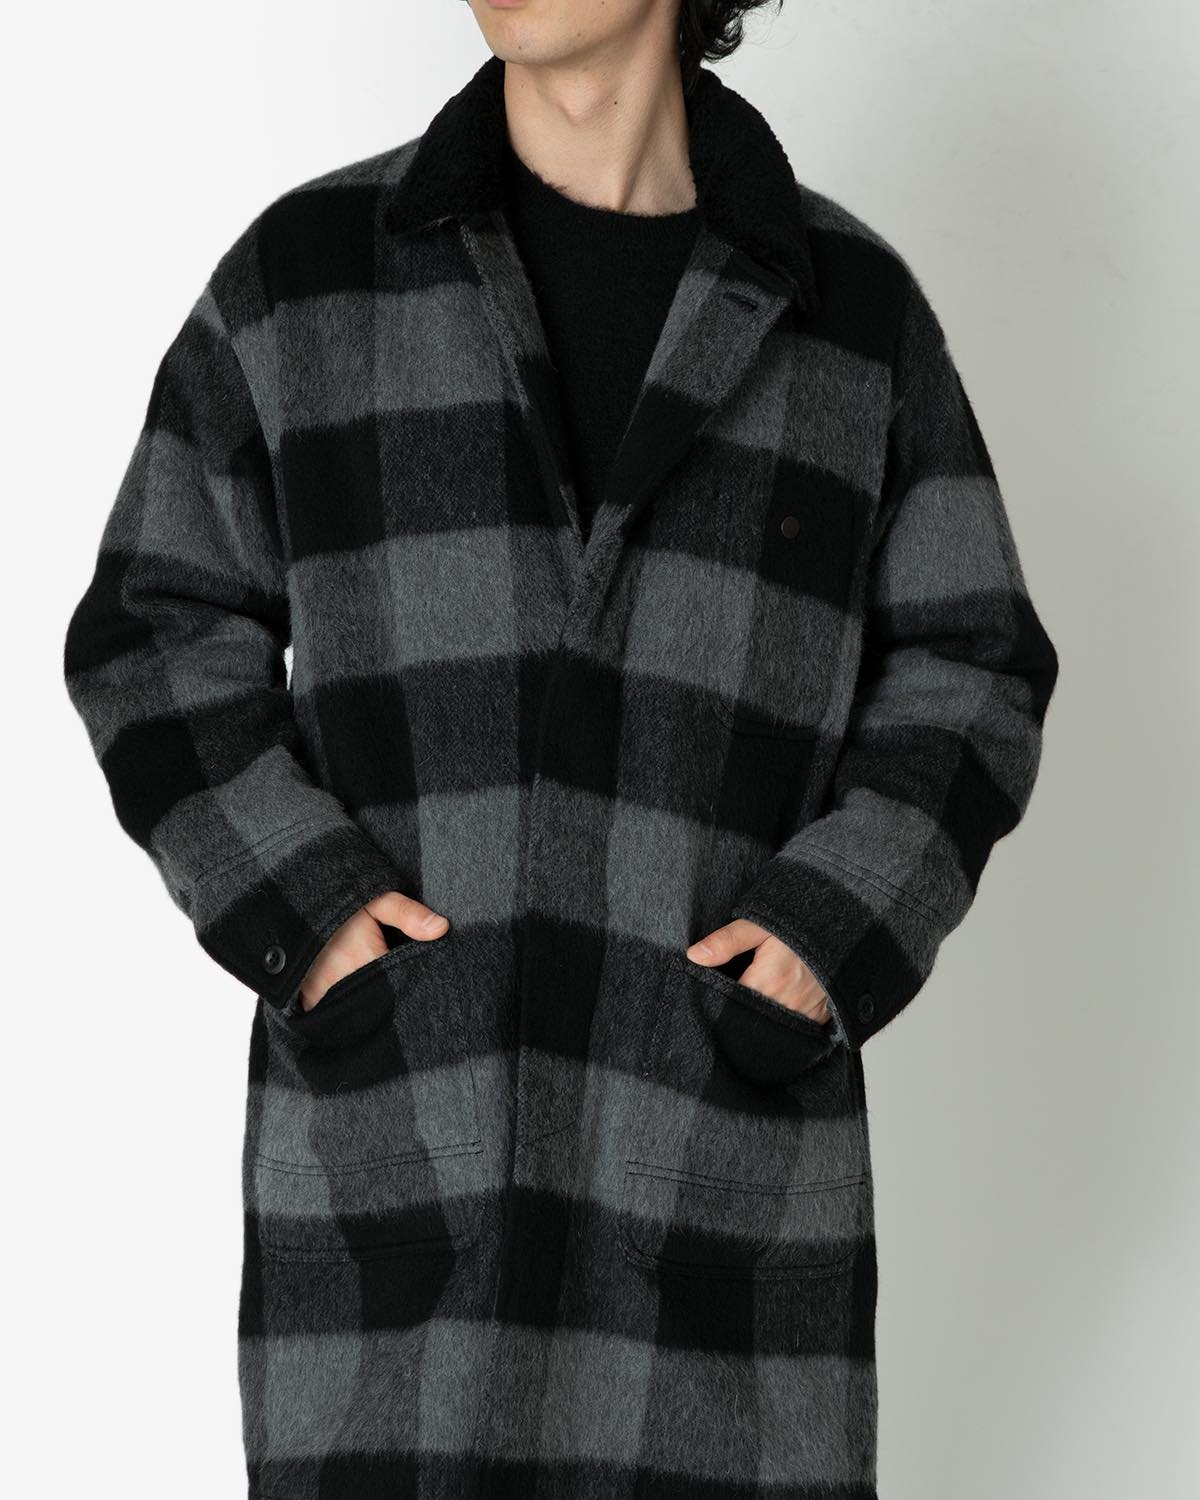 RANCHER LONG COAT W/P/N/A WOOL DOBBY BUFFALO CHECK WITH GORE-TEX WINDSTOPPER